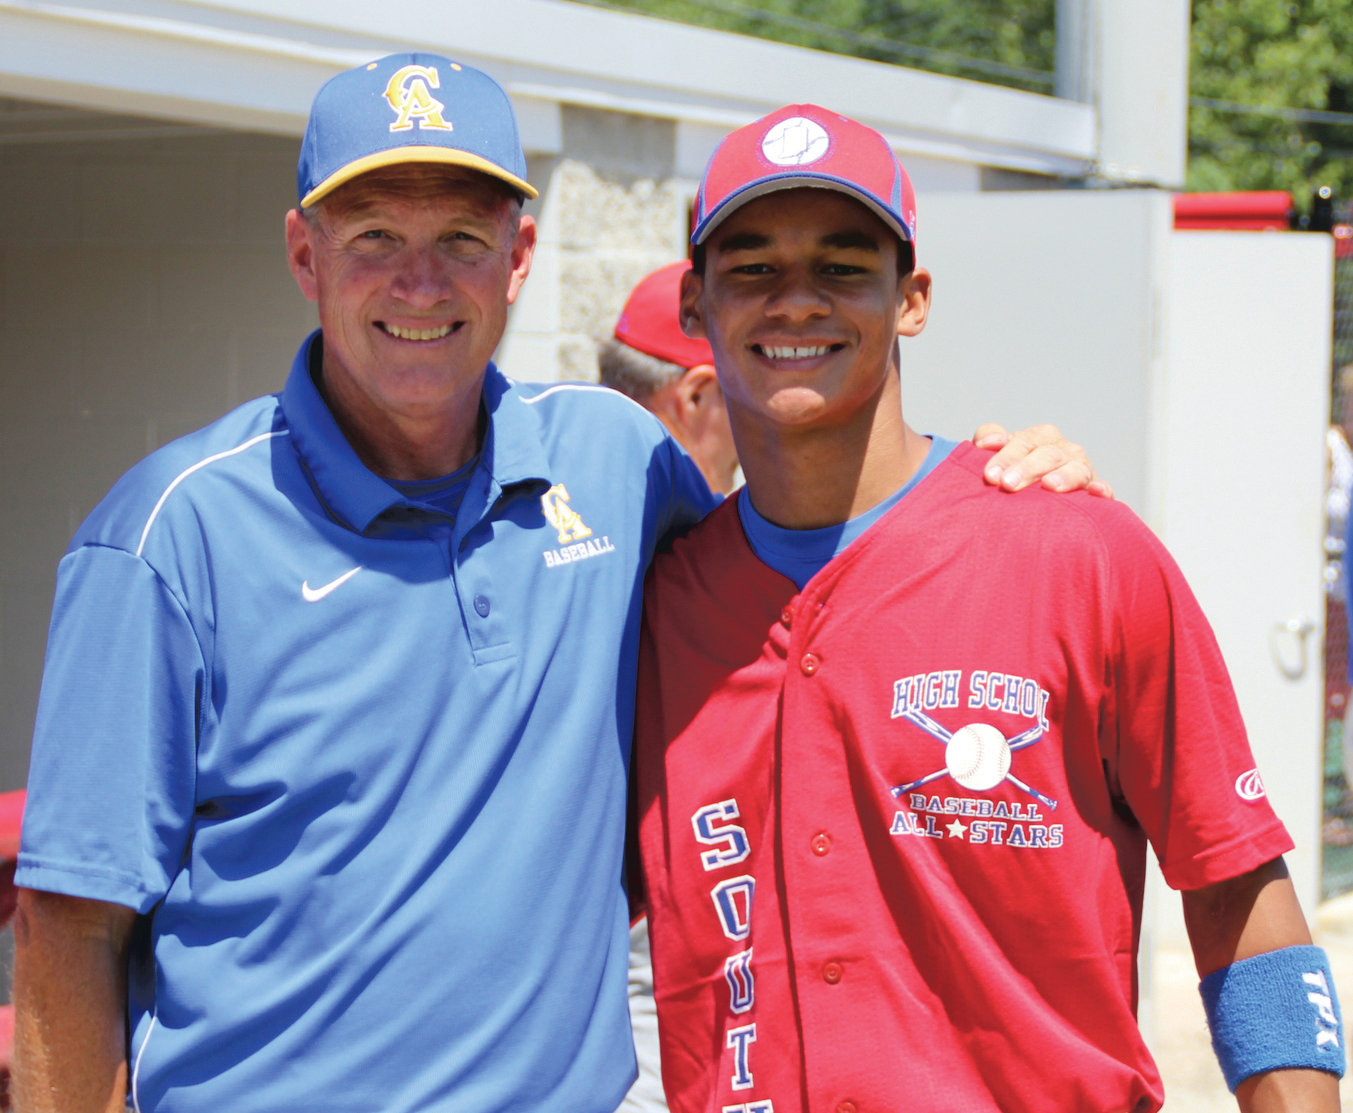 Jordan Jackson, right, was one of 13 Indiana North/South All Stars that John Froedge, left, coached in his 39-year career.